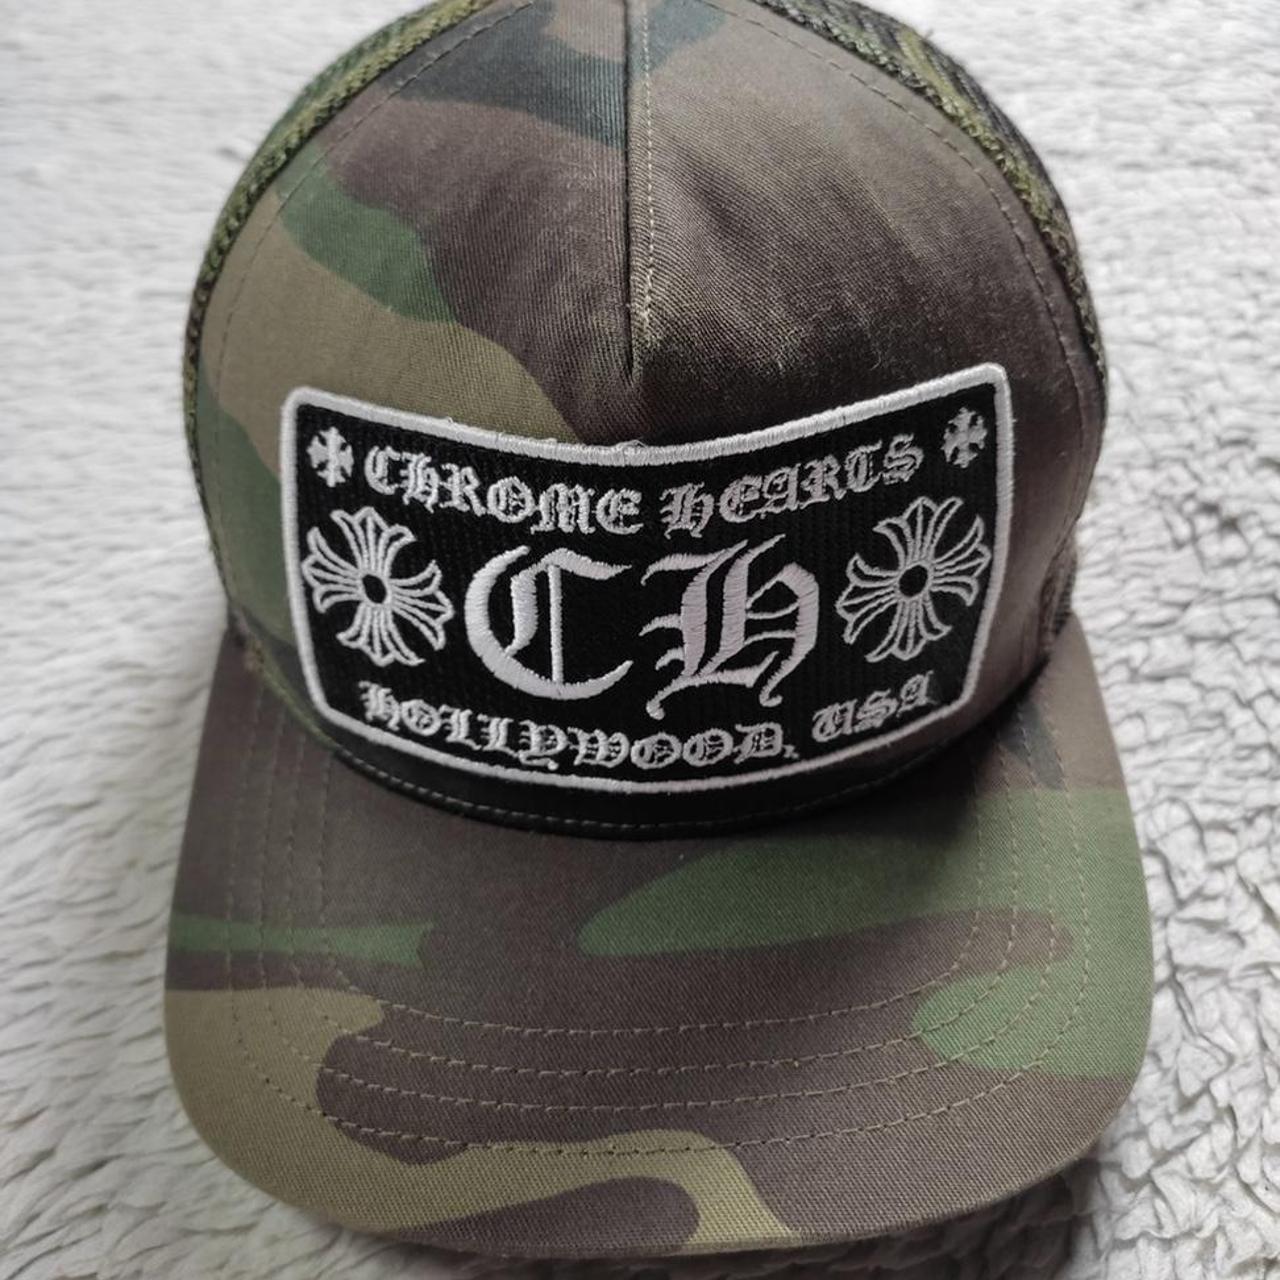 Chrome Hearts Trucker Hat Camo , Brand new , Fits all...